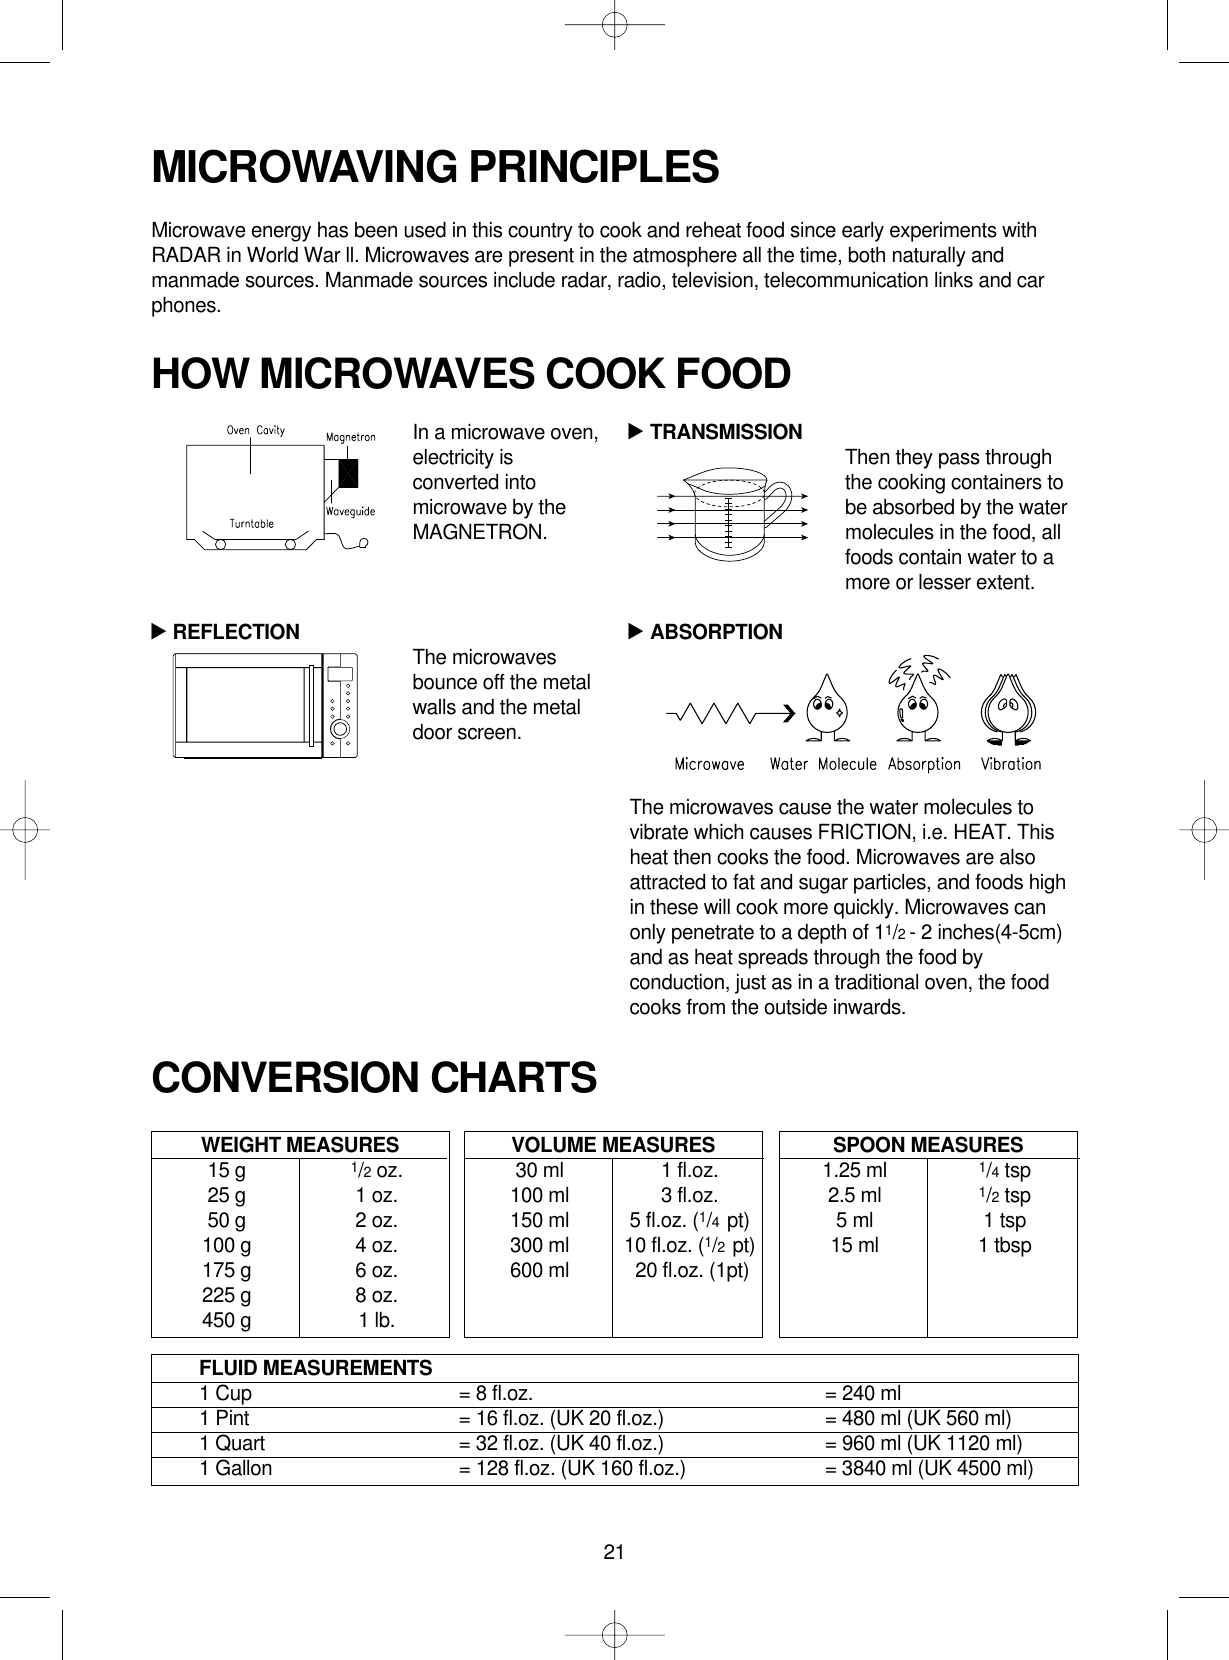 21MICROWAVING PRINCIPLESMicrowave energy has been used in this country to cook and reheat food since early experiments withRADAR in World War ll. Microwaves are present in the atmosphere all the time, both naturally andmanmade sources. Manmade sources include radar, radio, television, telecommunication links and carphones.CONVERSION CHARTSIn a microwave oven,electricity isconverted intomicrowave by theMAGNETRON.REFLECTION The microwavesbounce off the metalwalls and the metaldoor screen.TRANSMISSION Then they pass throughthe cooking containers tobe absorbed by the watermolecules in the food, allfoods contain water to amore or lesser extent.ABSORPTIONThe microwaves cause the water molecules tovibrate which causes FRICTION, i.e. HEAT. Thisheat then cooks the food. Microwaves are alsoattracted to fat and sugar particles, and foods highin these will cook more quickly. Microwaves canonly penetrate to a depth of 11/2 - 2 inches(4-5cm)and as heat spreads through the food byconduction, just as in a traditional oven, the foodcooks from the outside inwards.WEIGHT MEASURES15 g 1/2oz.25 g 1 oz.50 g 2 oz.100 g 4 oz.175 g 6 oz.225 g 8 oz.450 g 1 lb.HOW MICROWAVES COOK FOOD▲▲▲VOLUME MEASURES30 ml 1 fl.oz.100 ml 3 fl.oz.150 ml 5 fl.oz. (1/4  pt)300 ml 10 fl.oz. (1/2  pt)600 ml 20 fl.oz. (1pt)SPOON MEASURES1.25 ml 1/4tsp2.5 ml 1/2tsp5 ml 1 tsp15 ml 1 tbspFLUID MEASUREMENTS1 Cup = 8 fl.oz. = 240 ml1 Pint = 16 fl.oz. (UK 20 fl.oz.) = 480 ml (UK 560 ml)1 Quart = 32 fl.oz. (UK 40 fl.oz.) = 960 ml (UK 1120 ml)1 Gallon = 128 fl.oz. (UK 160 fl.oz.) = 3840 ml (UK 4500 ml)